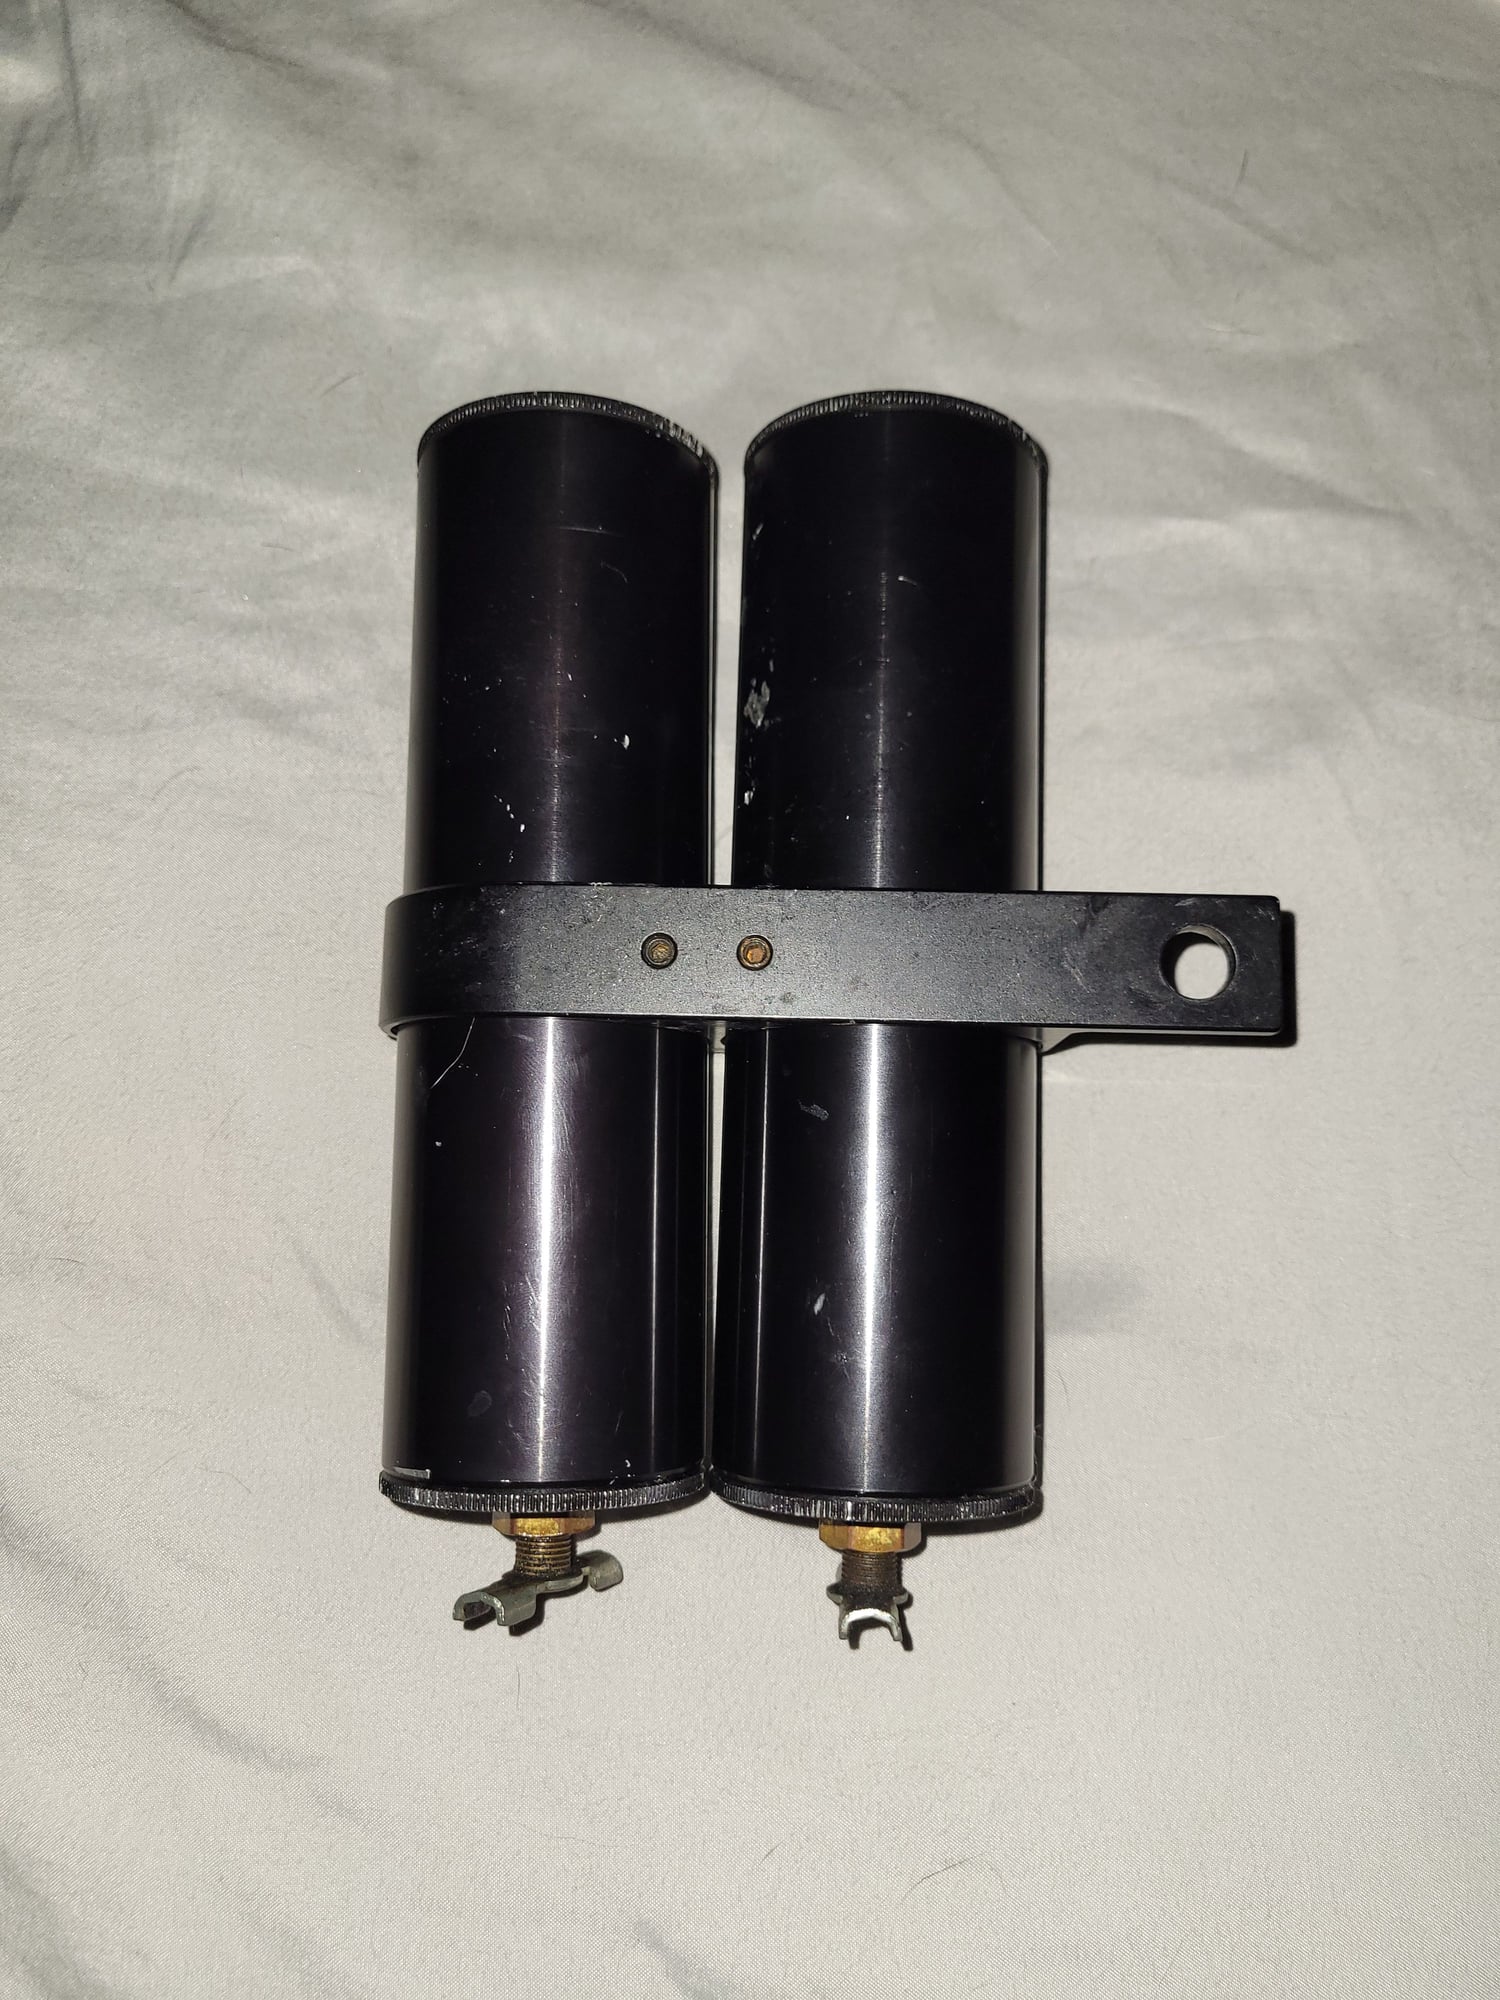 Miscellaneous - Mike Norris ? Dual catch cans - Used - All Years Any Make All Models - Jupiter, FL 33458, United States